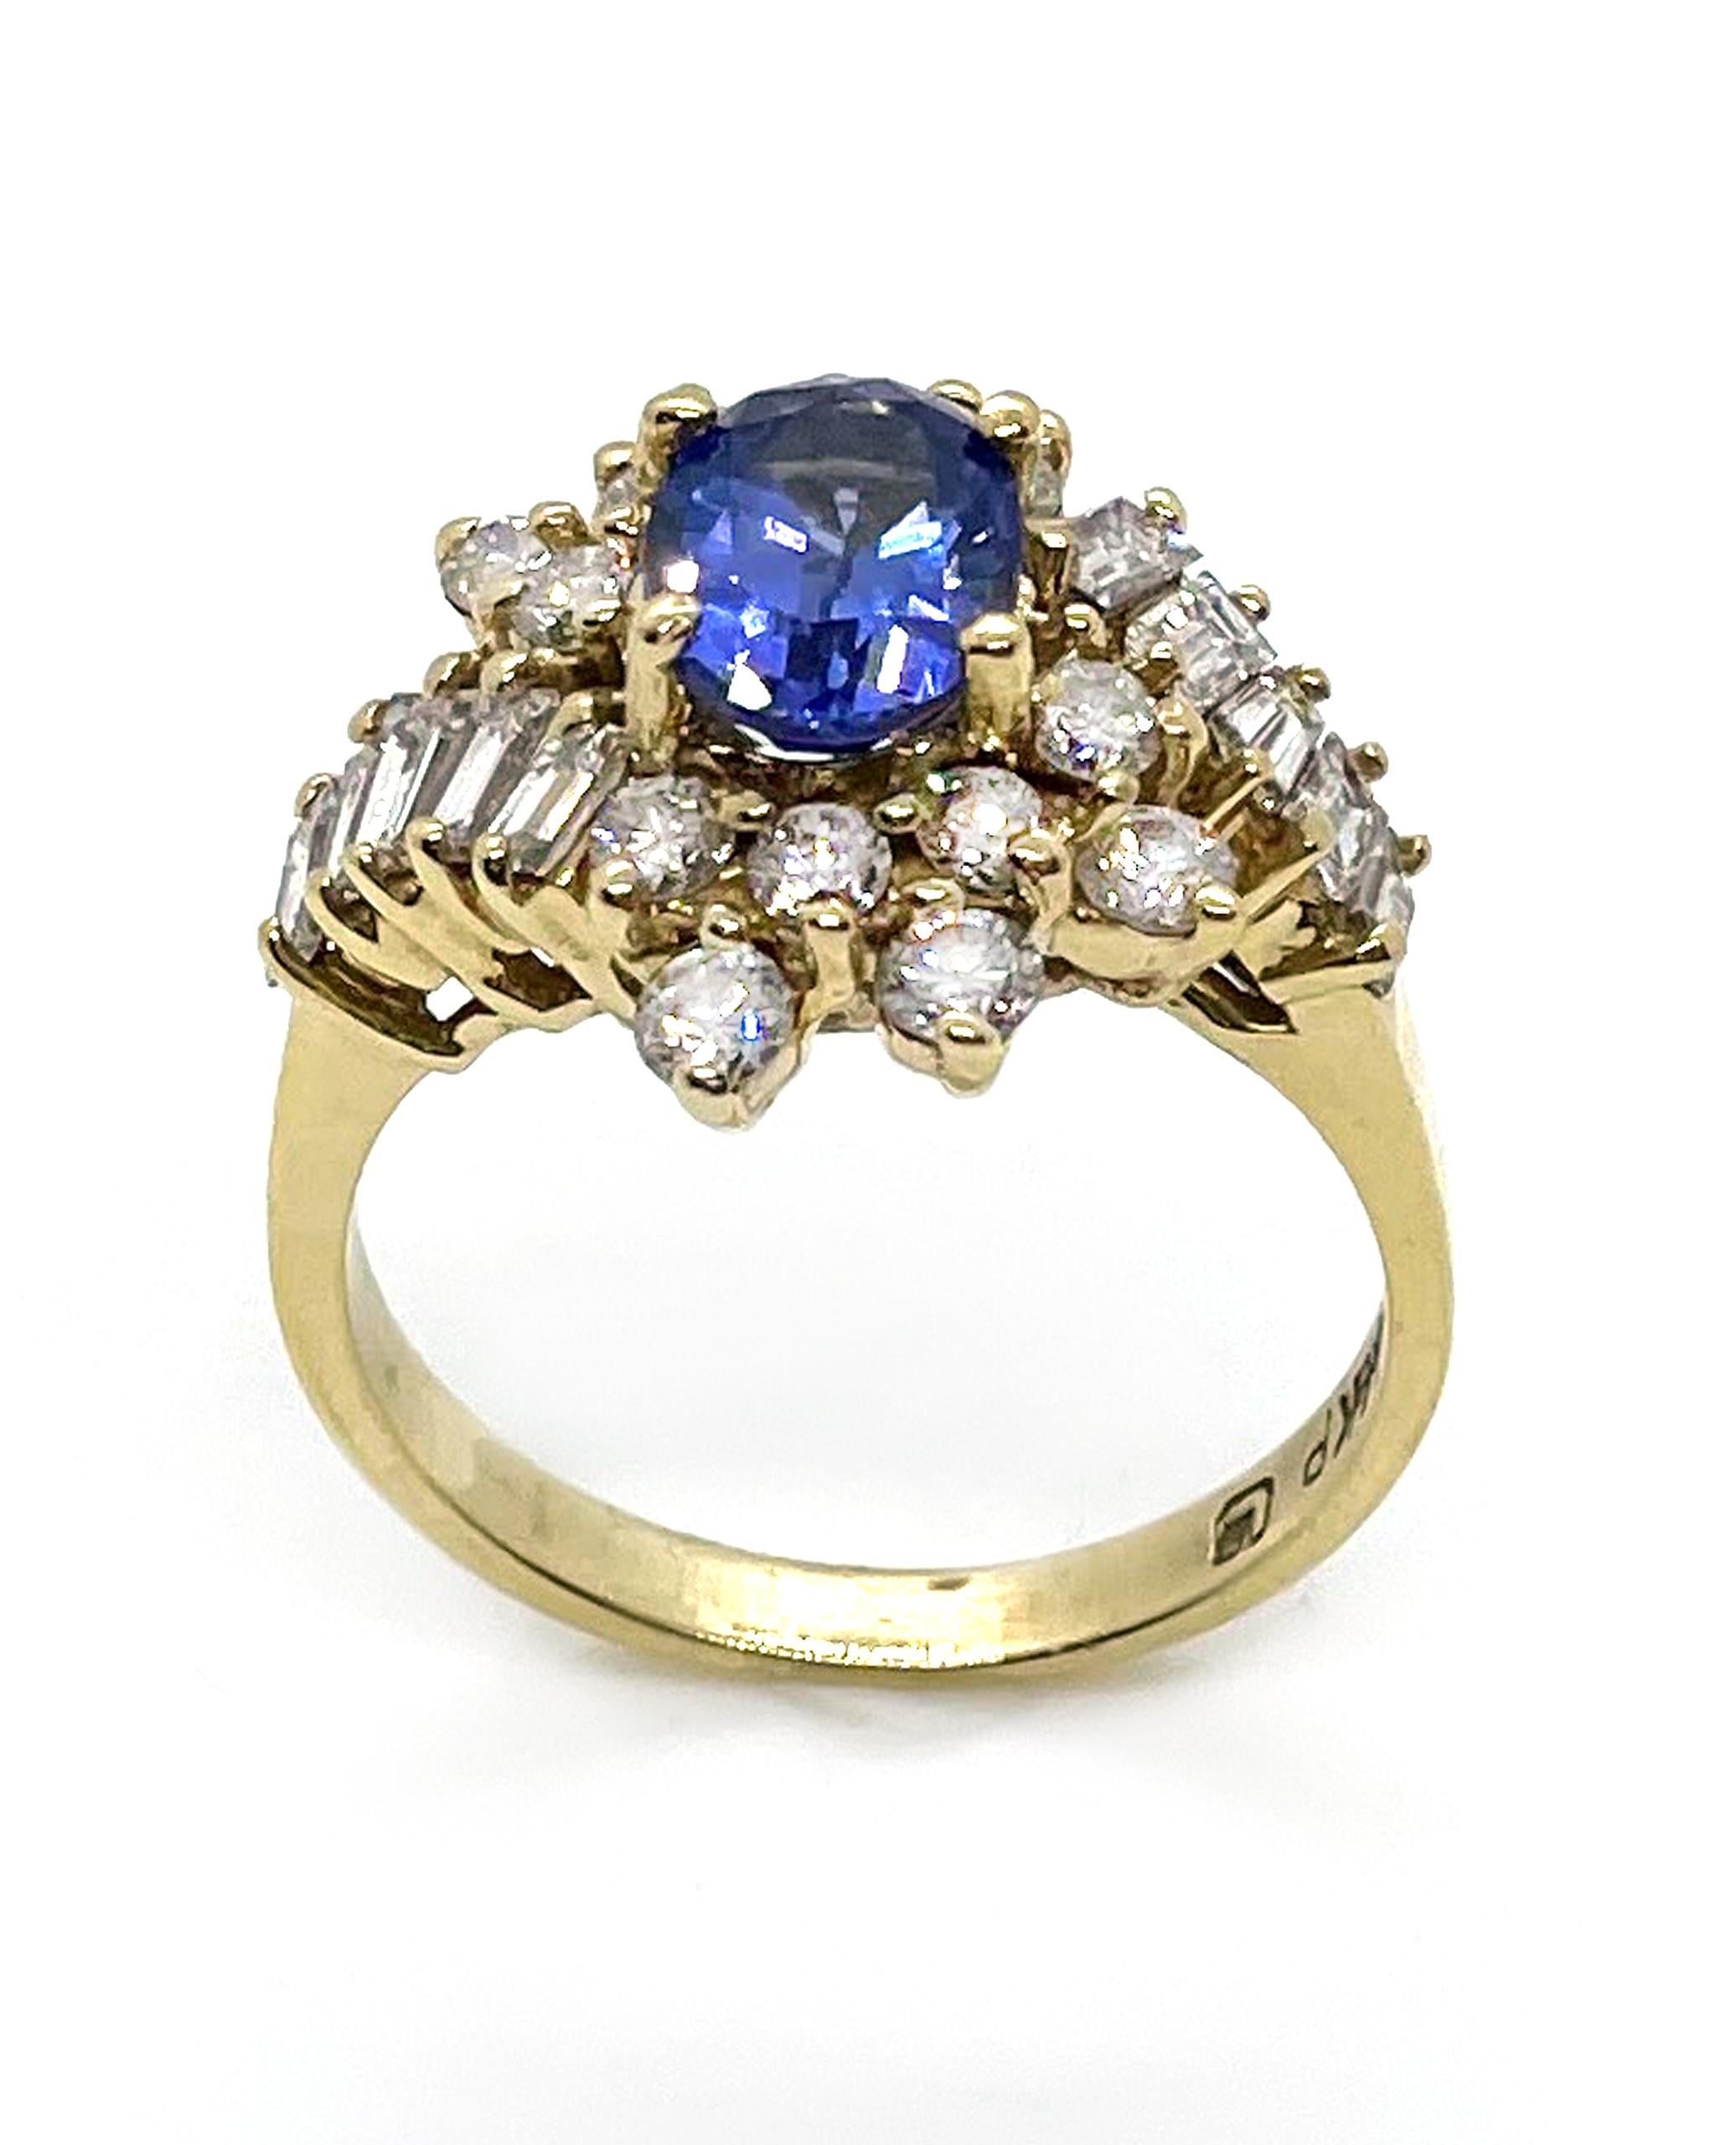 Vintage 14K yellow gold ring with one oval tanzanite 1.15 carats.  14 round diamonds and 10 baguette diamonds totaling 1.22 carats. (G/H color, VS clarity)

-Created circa 1985